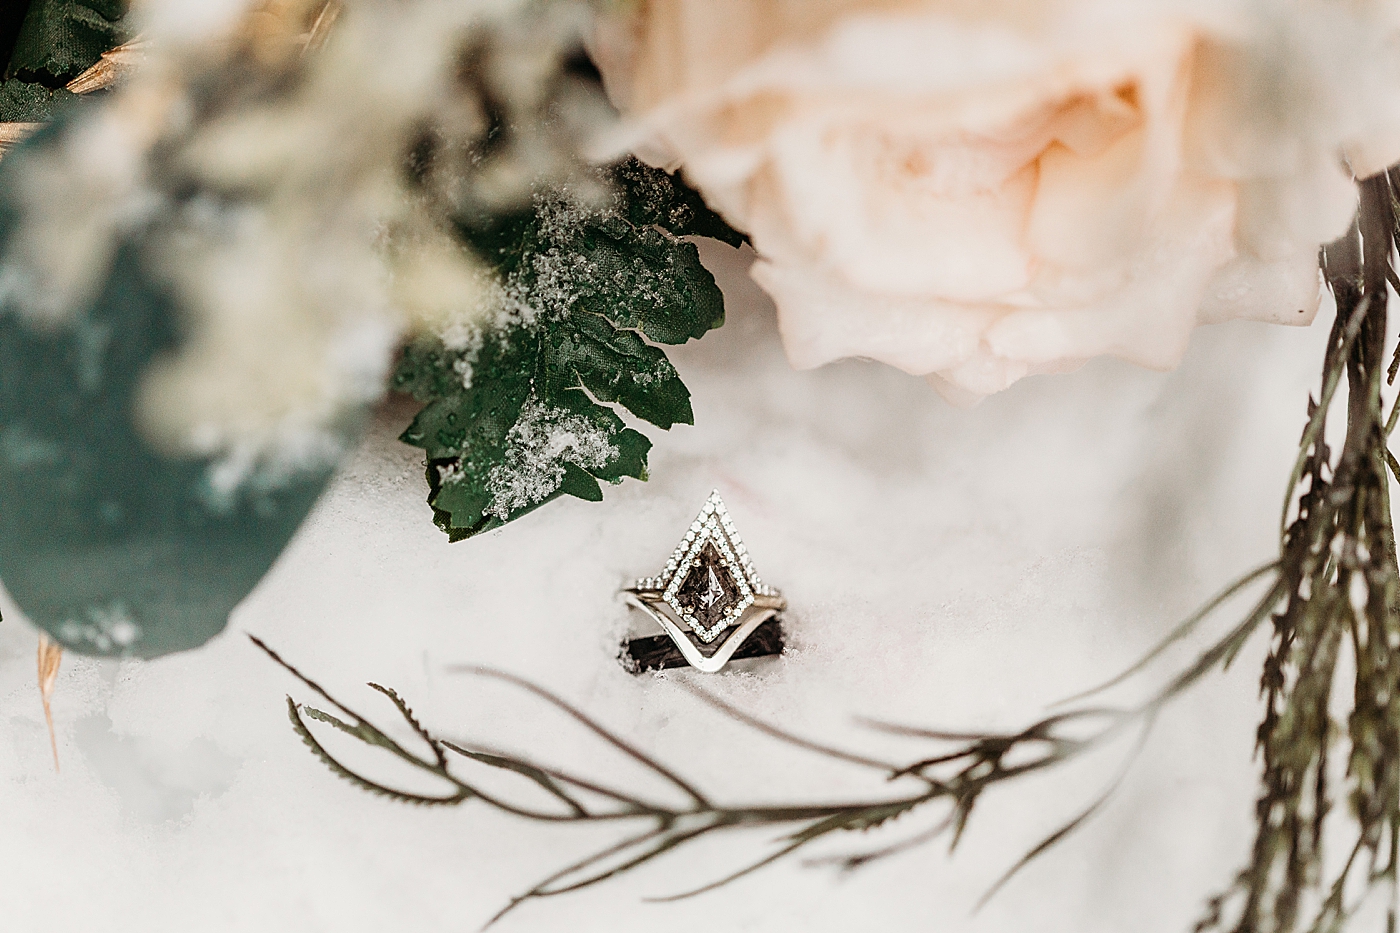 Wedding ring details in the snow. Photo by Megan Montalvo Photography.